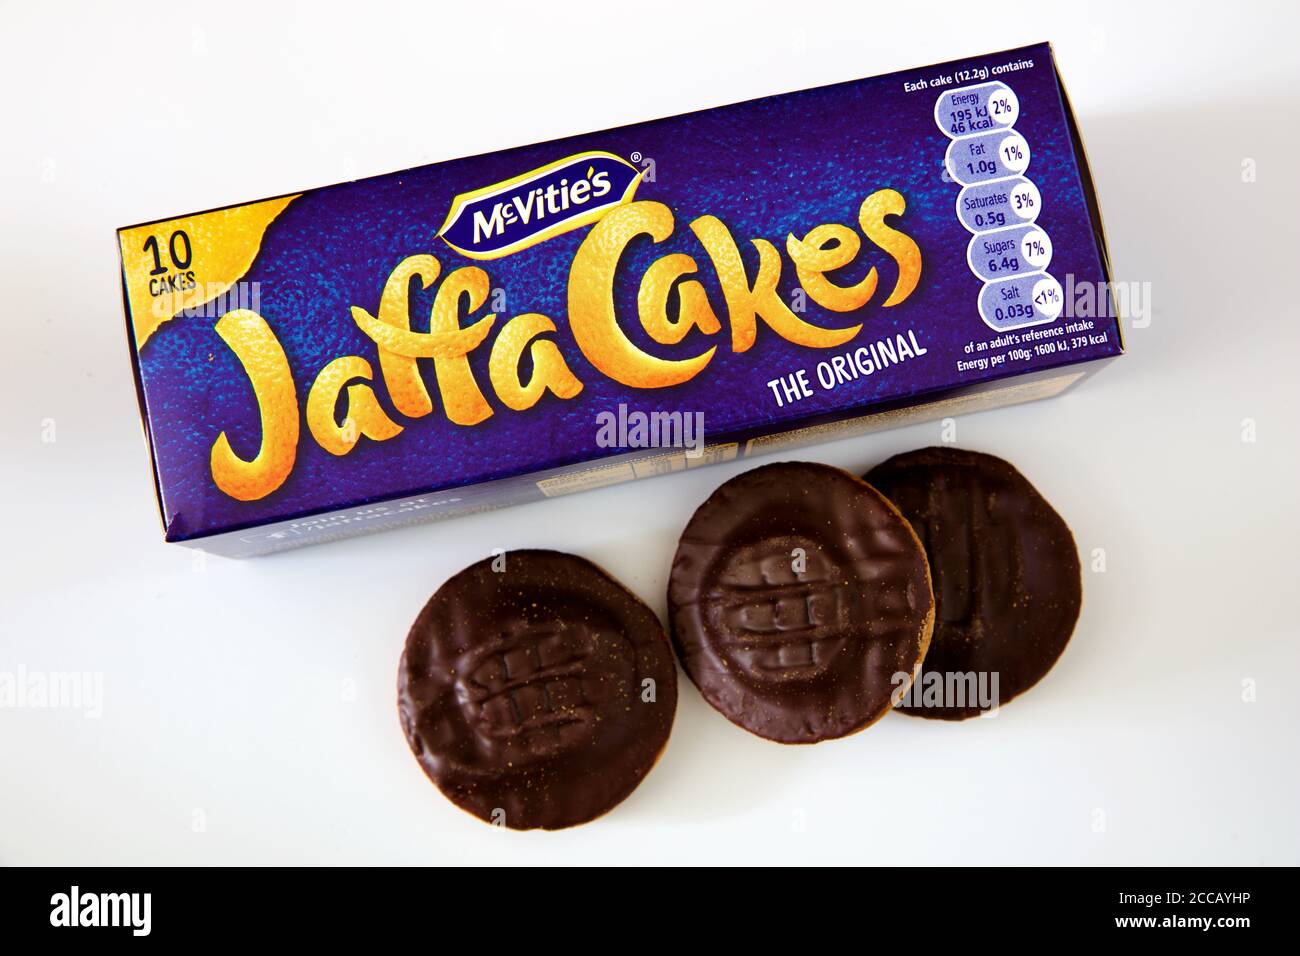 McVitie's has revealed a Jaffa Cakes Hamper for Christmas